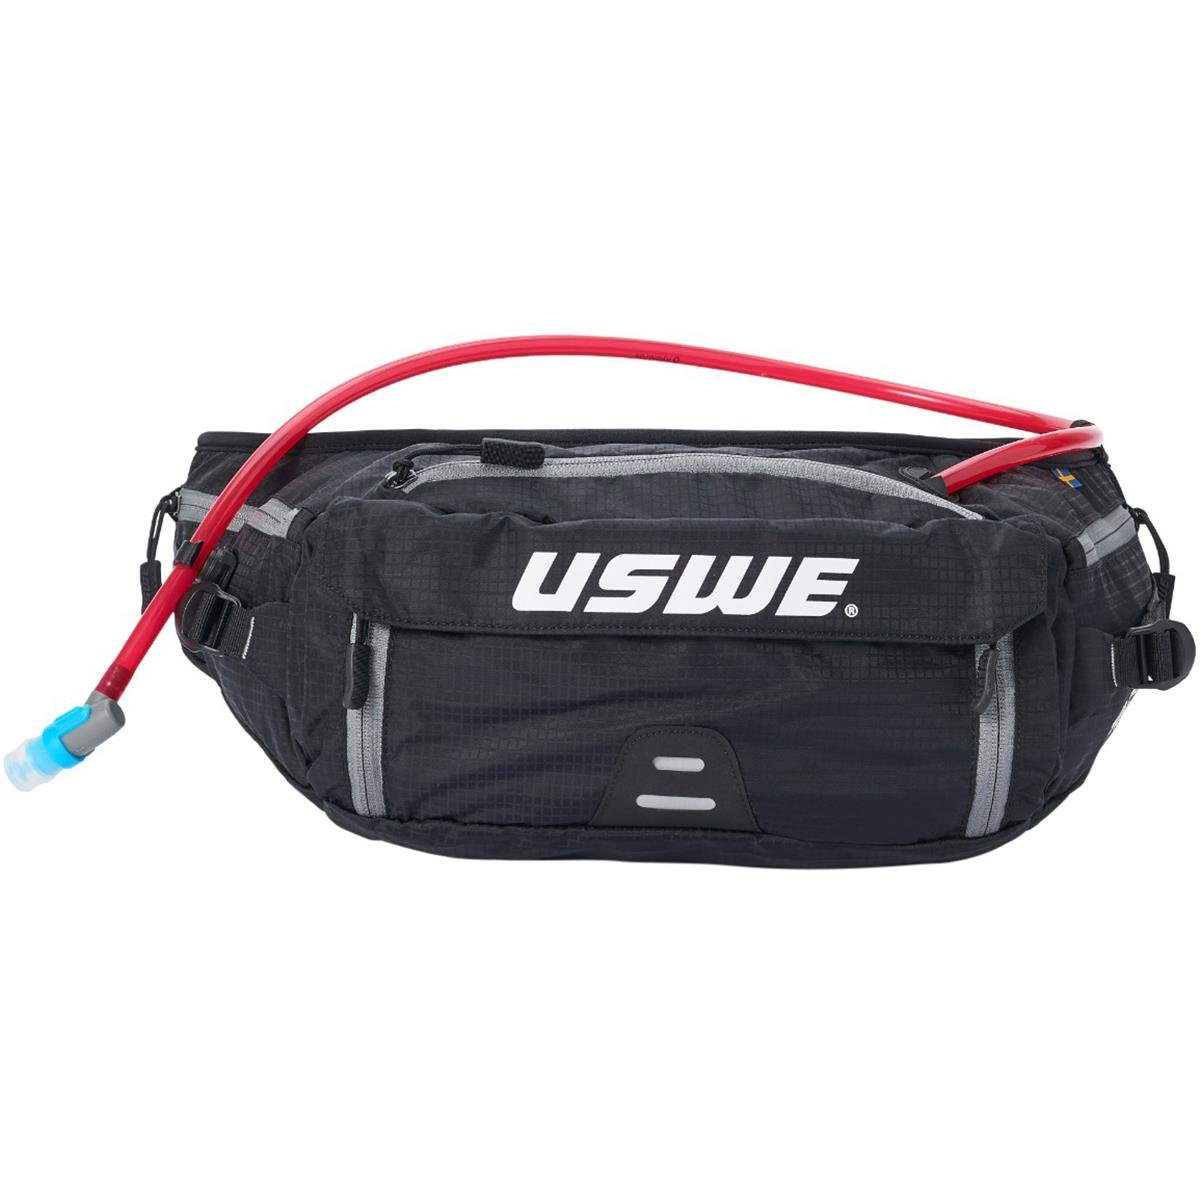 USWE Hip Pack with Hydration System 1.5 Liters Zulo 6 Black